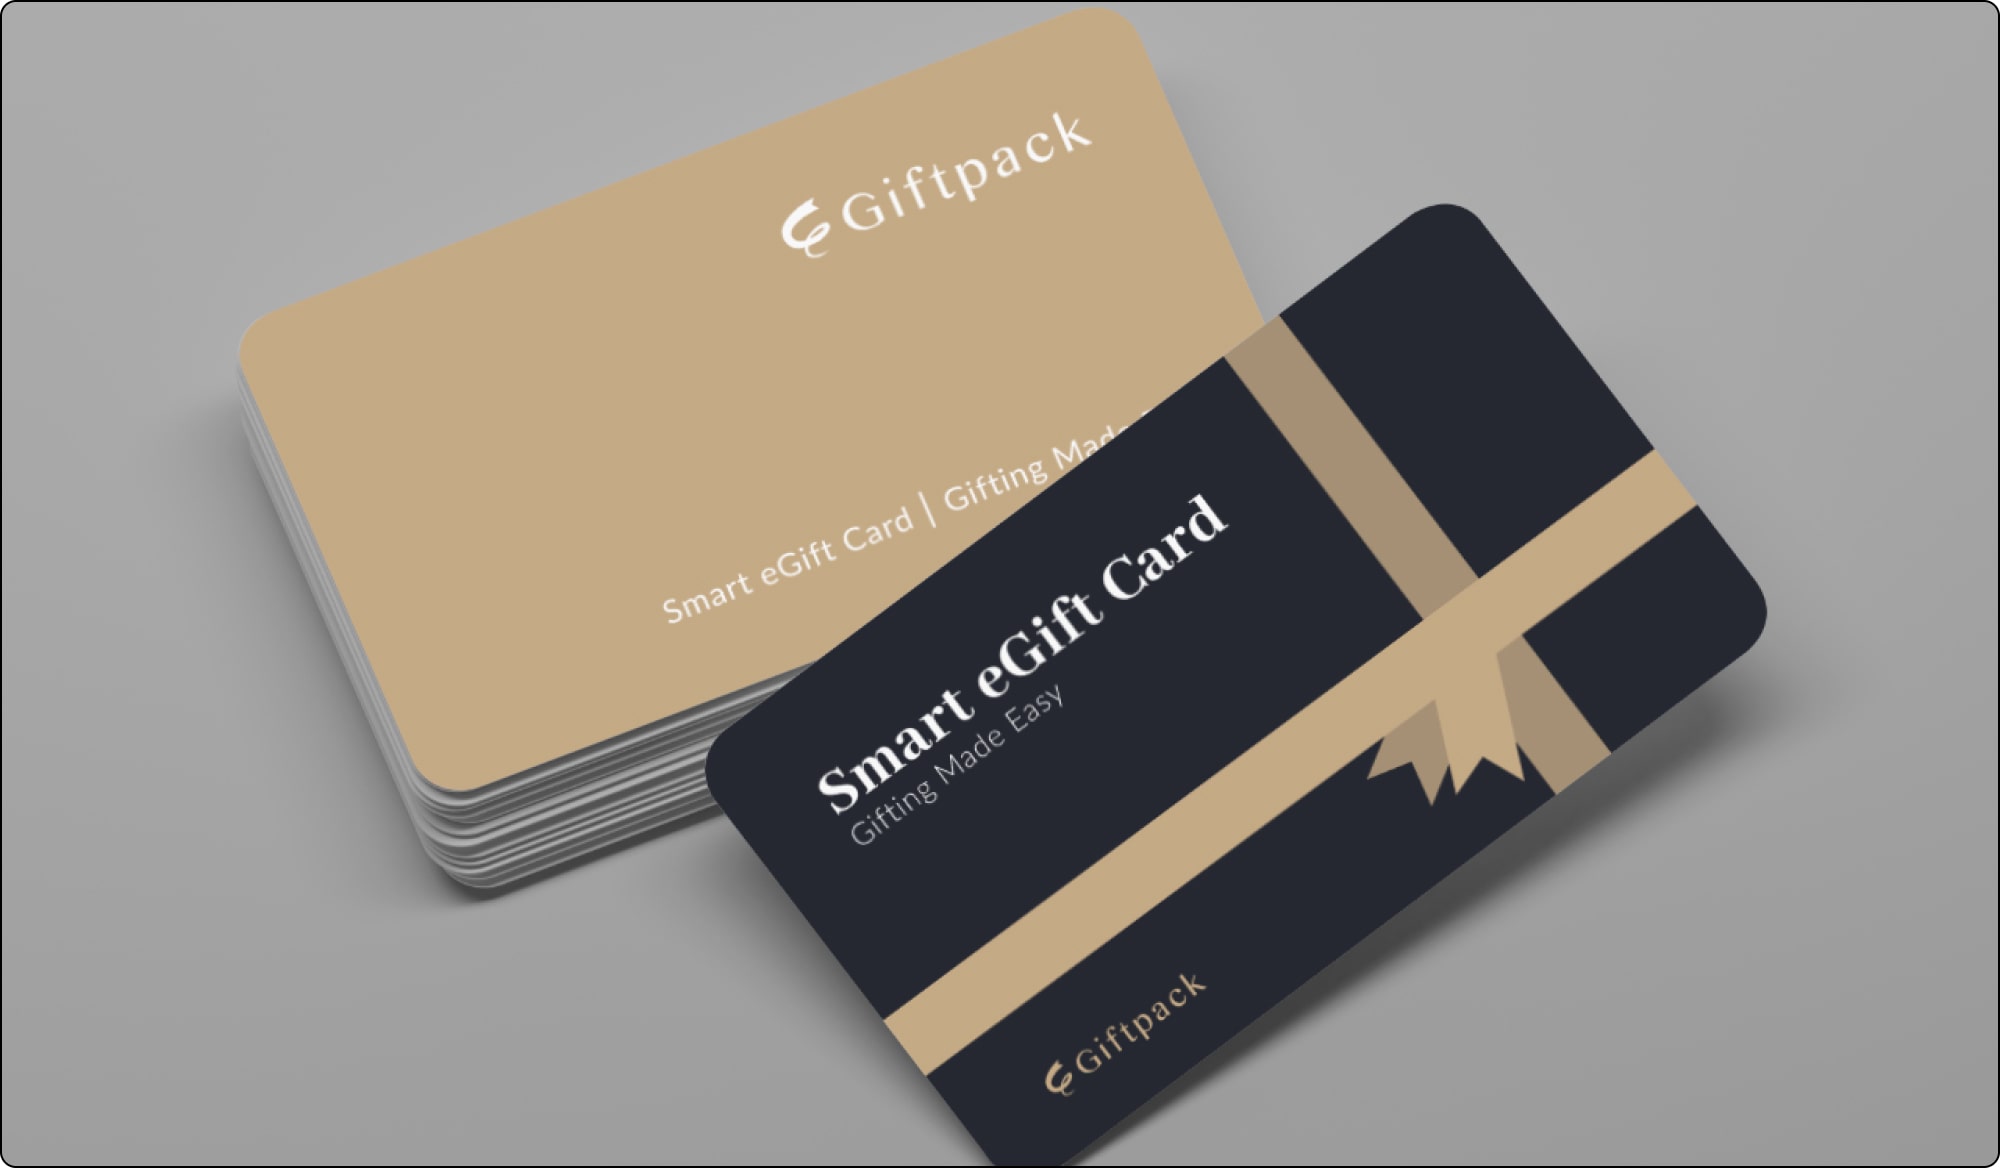 giftpack smart egift card for 350 brands for corporate appreciation gifts